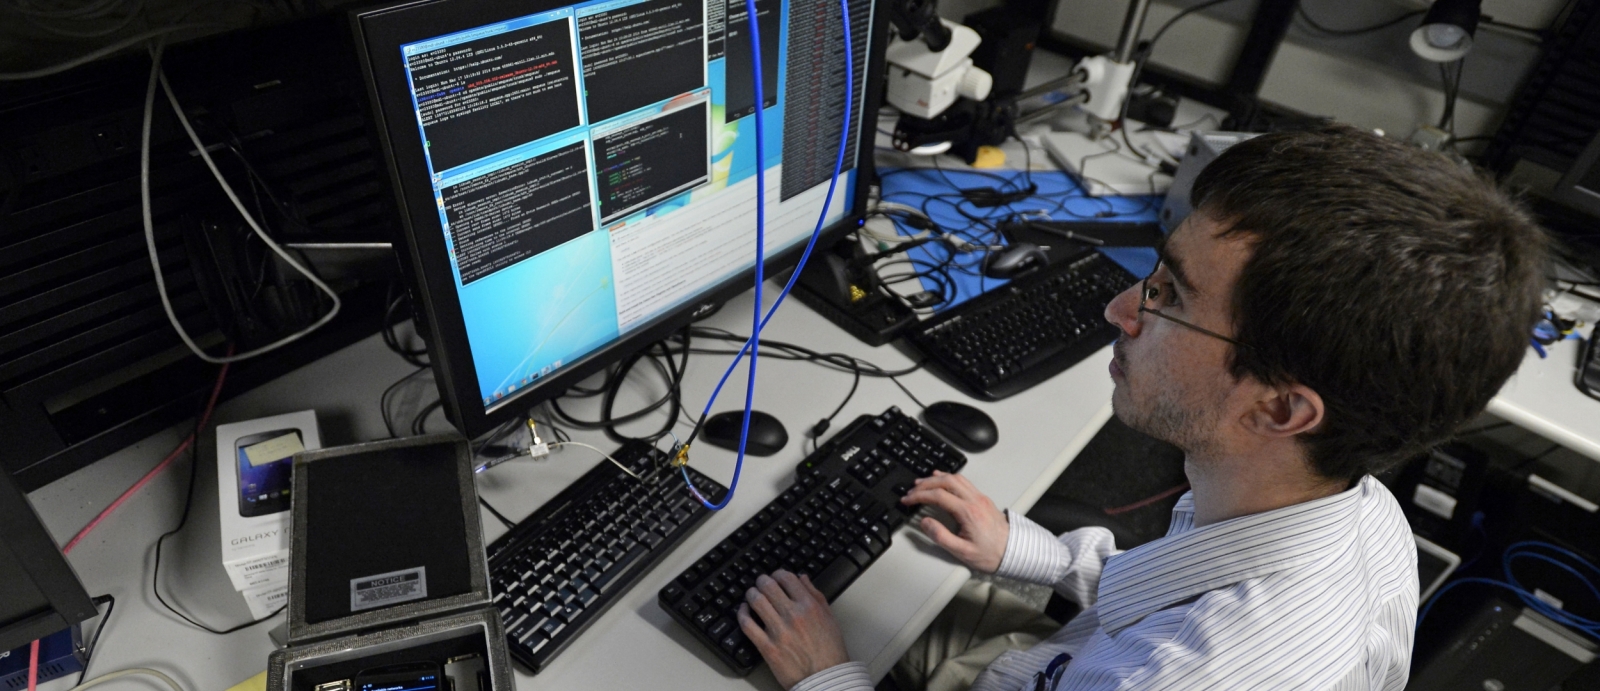 In the mobile device laboratory, a researcher in the Cyber Systems and Operations Group investigates the cyber-electromagnetic environment for handheld devices and wireless communication.